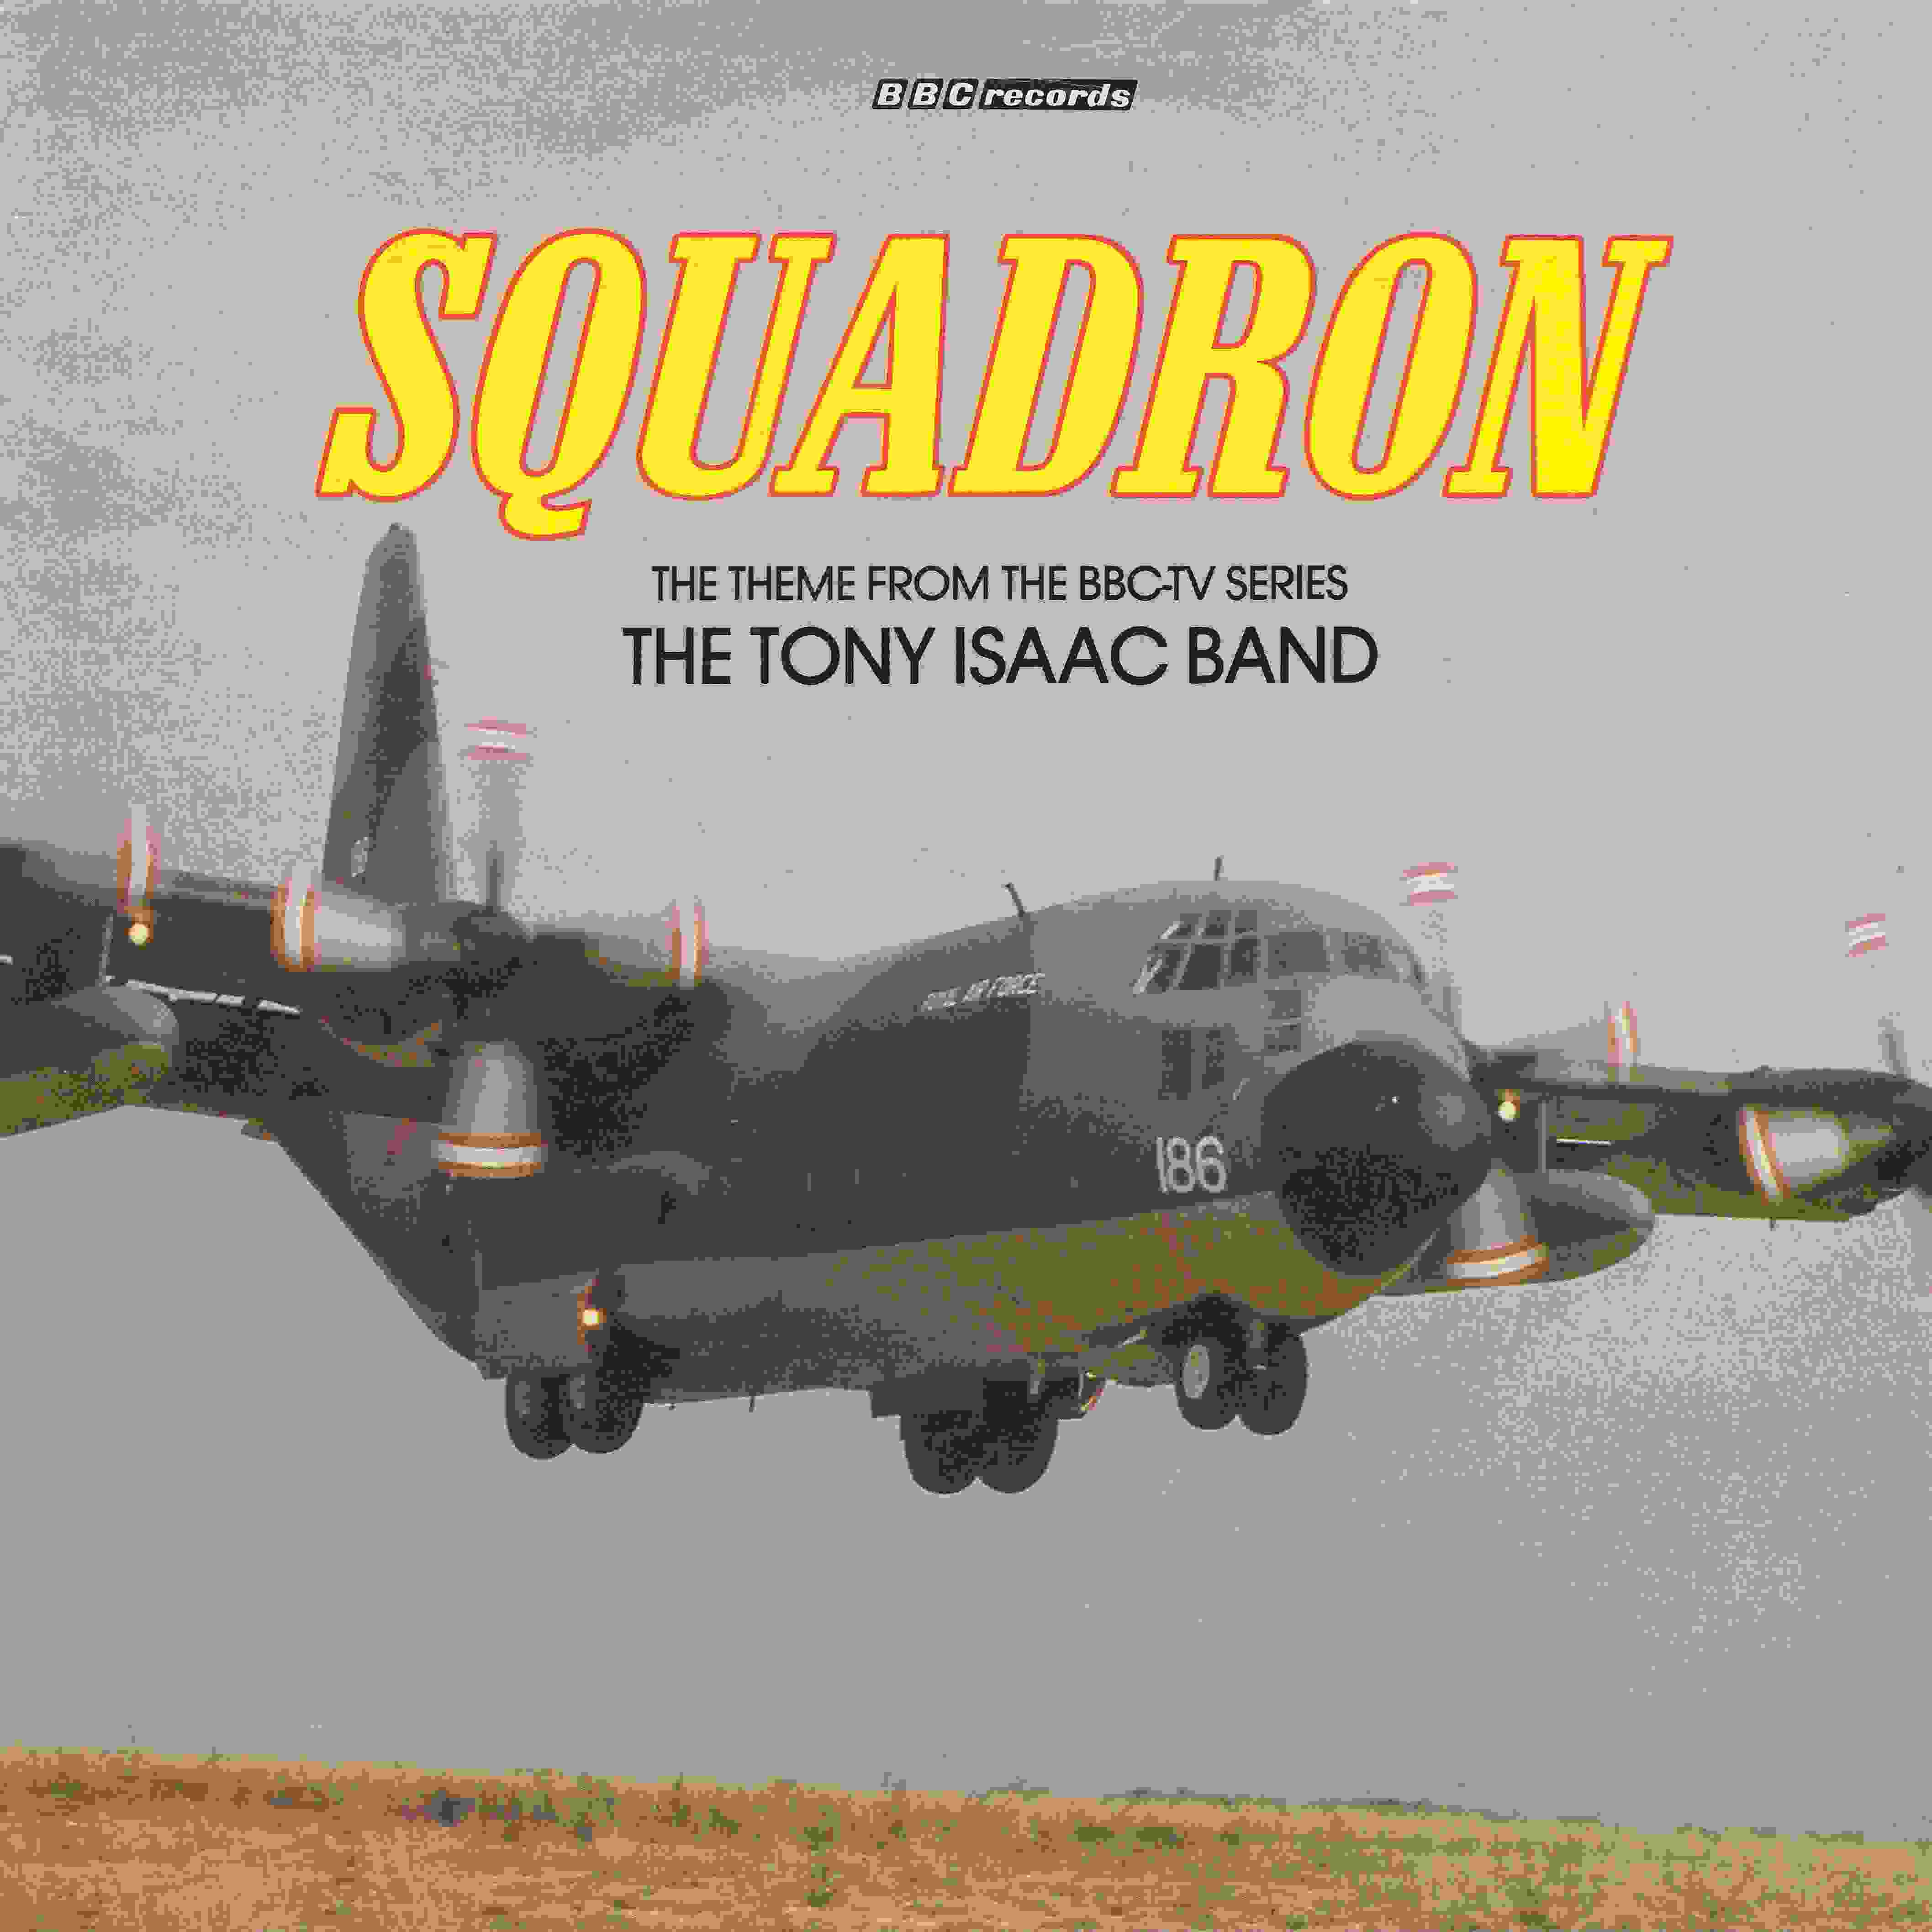 Picture of RESL 120 Squadron by artist Tony Isaac from the BBC singles - Records and Tapes library